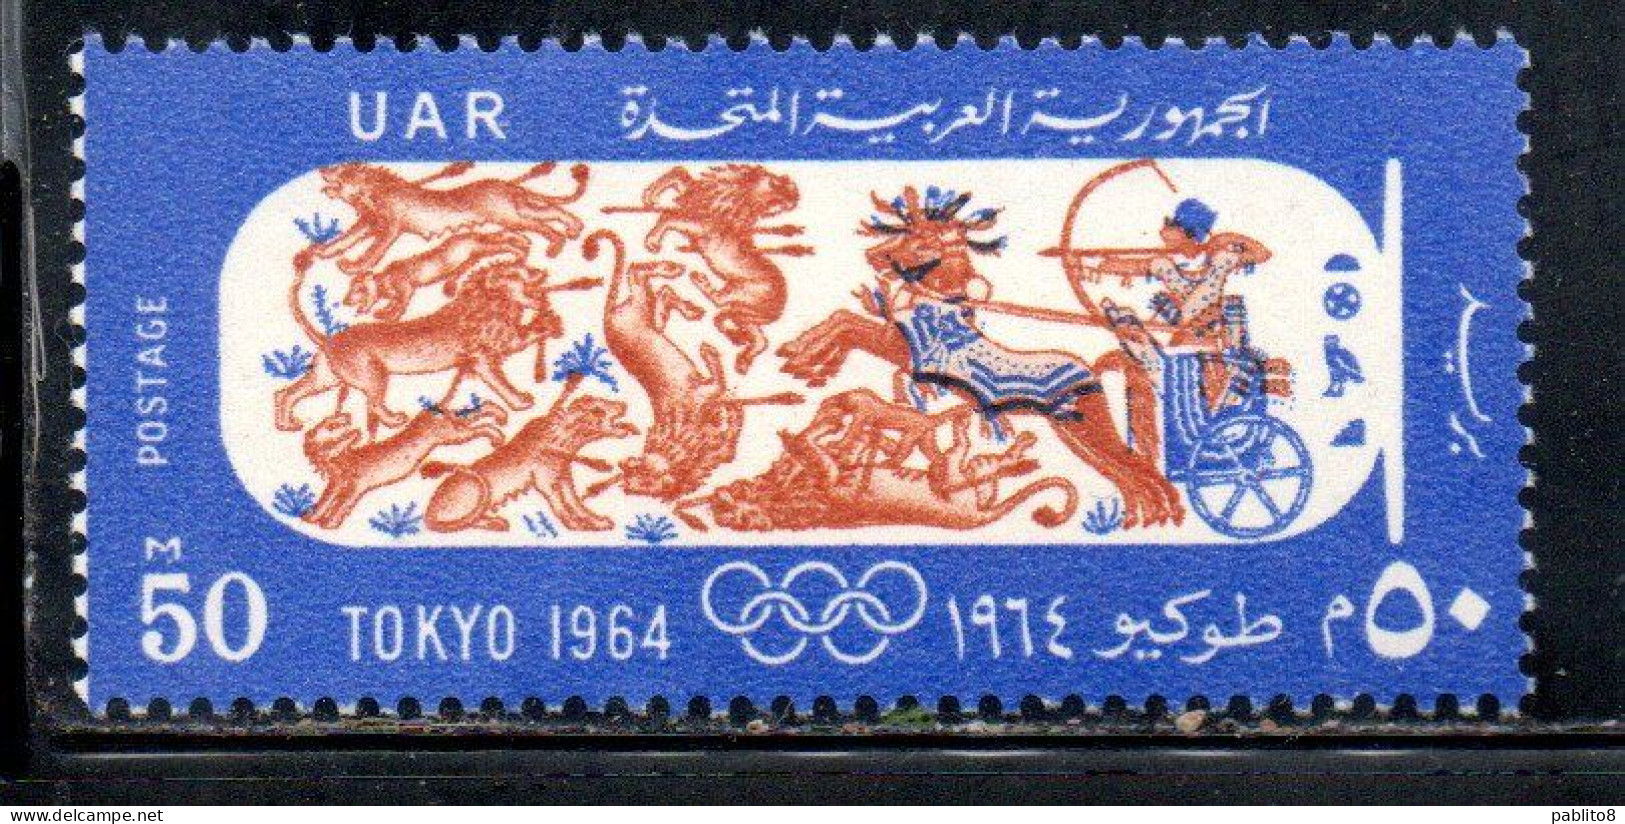 UAR EGYPT EGITTO 1964 OLYMIC GAMES TOKYO PHARAOH IN CHARIOT HUNTING 50m MNH - Unused Stamps